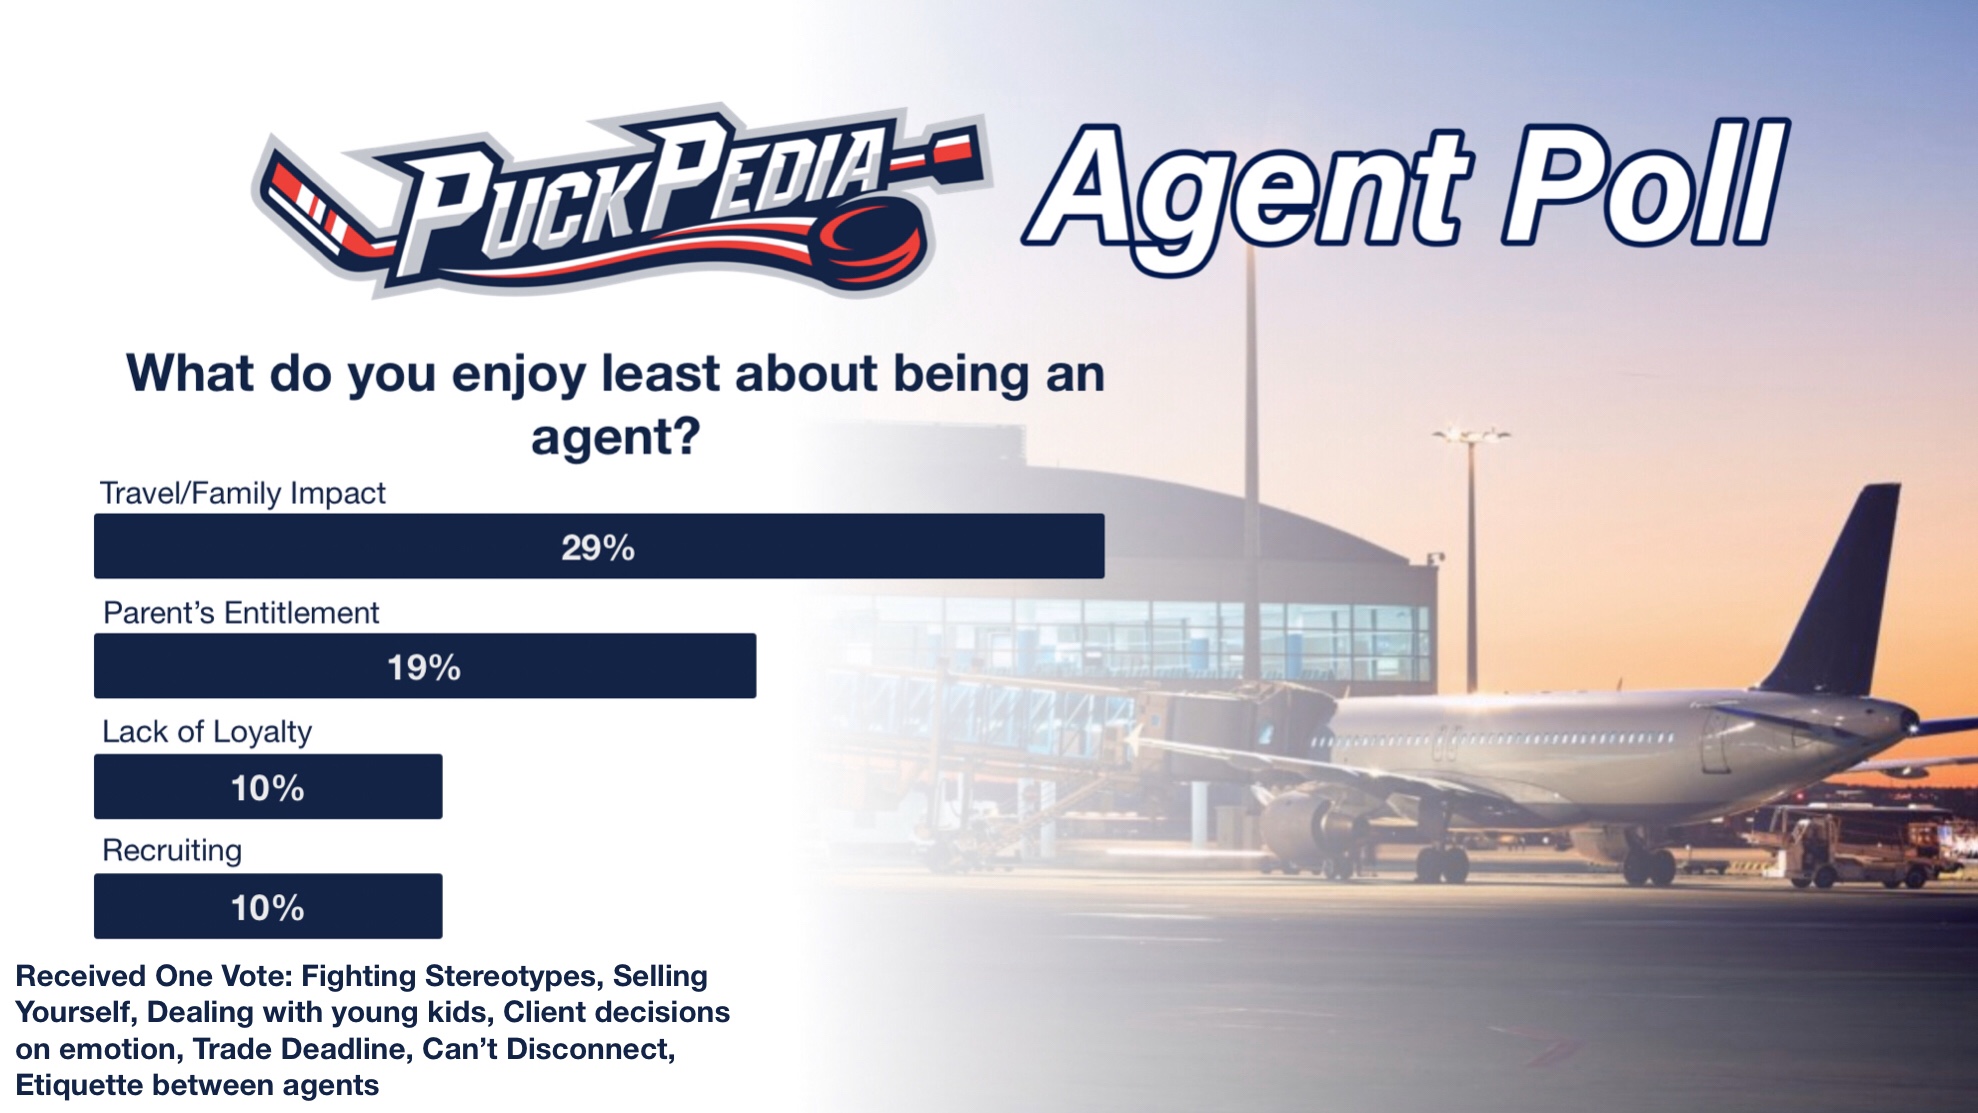 What do you enjoy the least about being an agent?